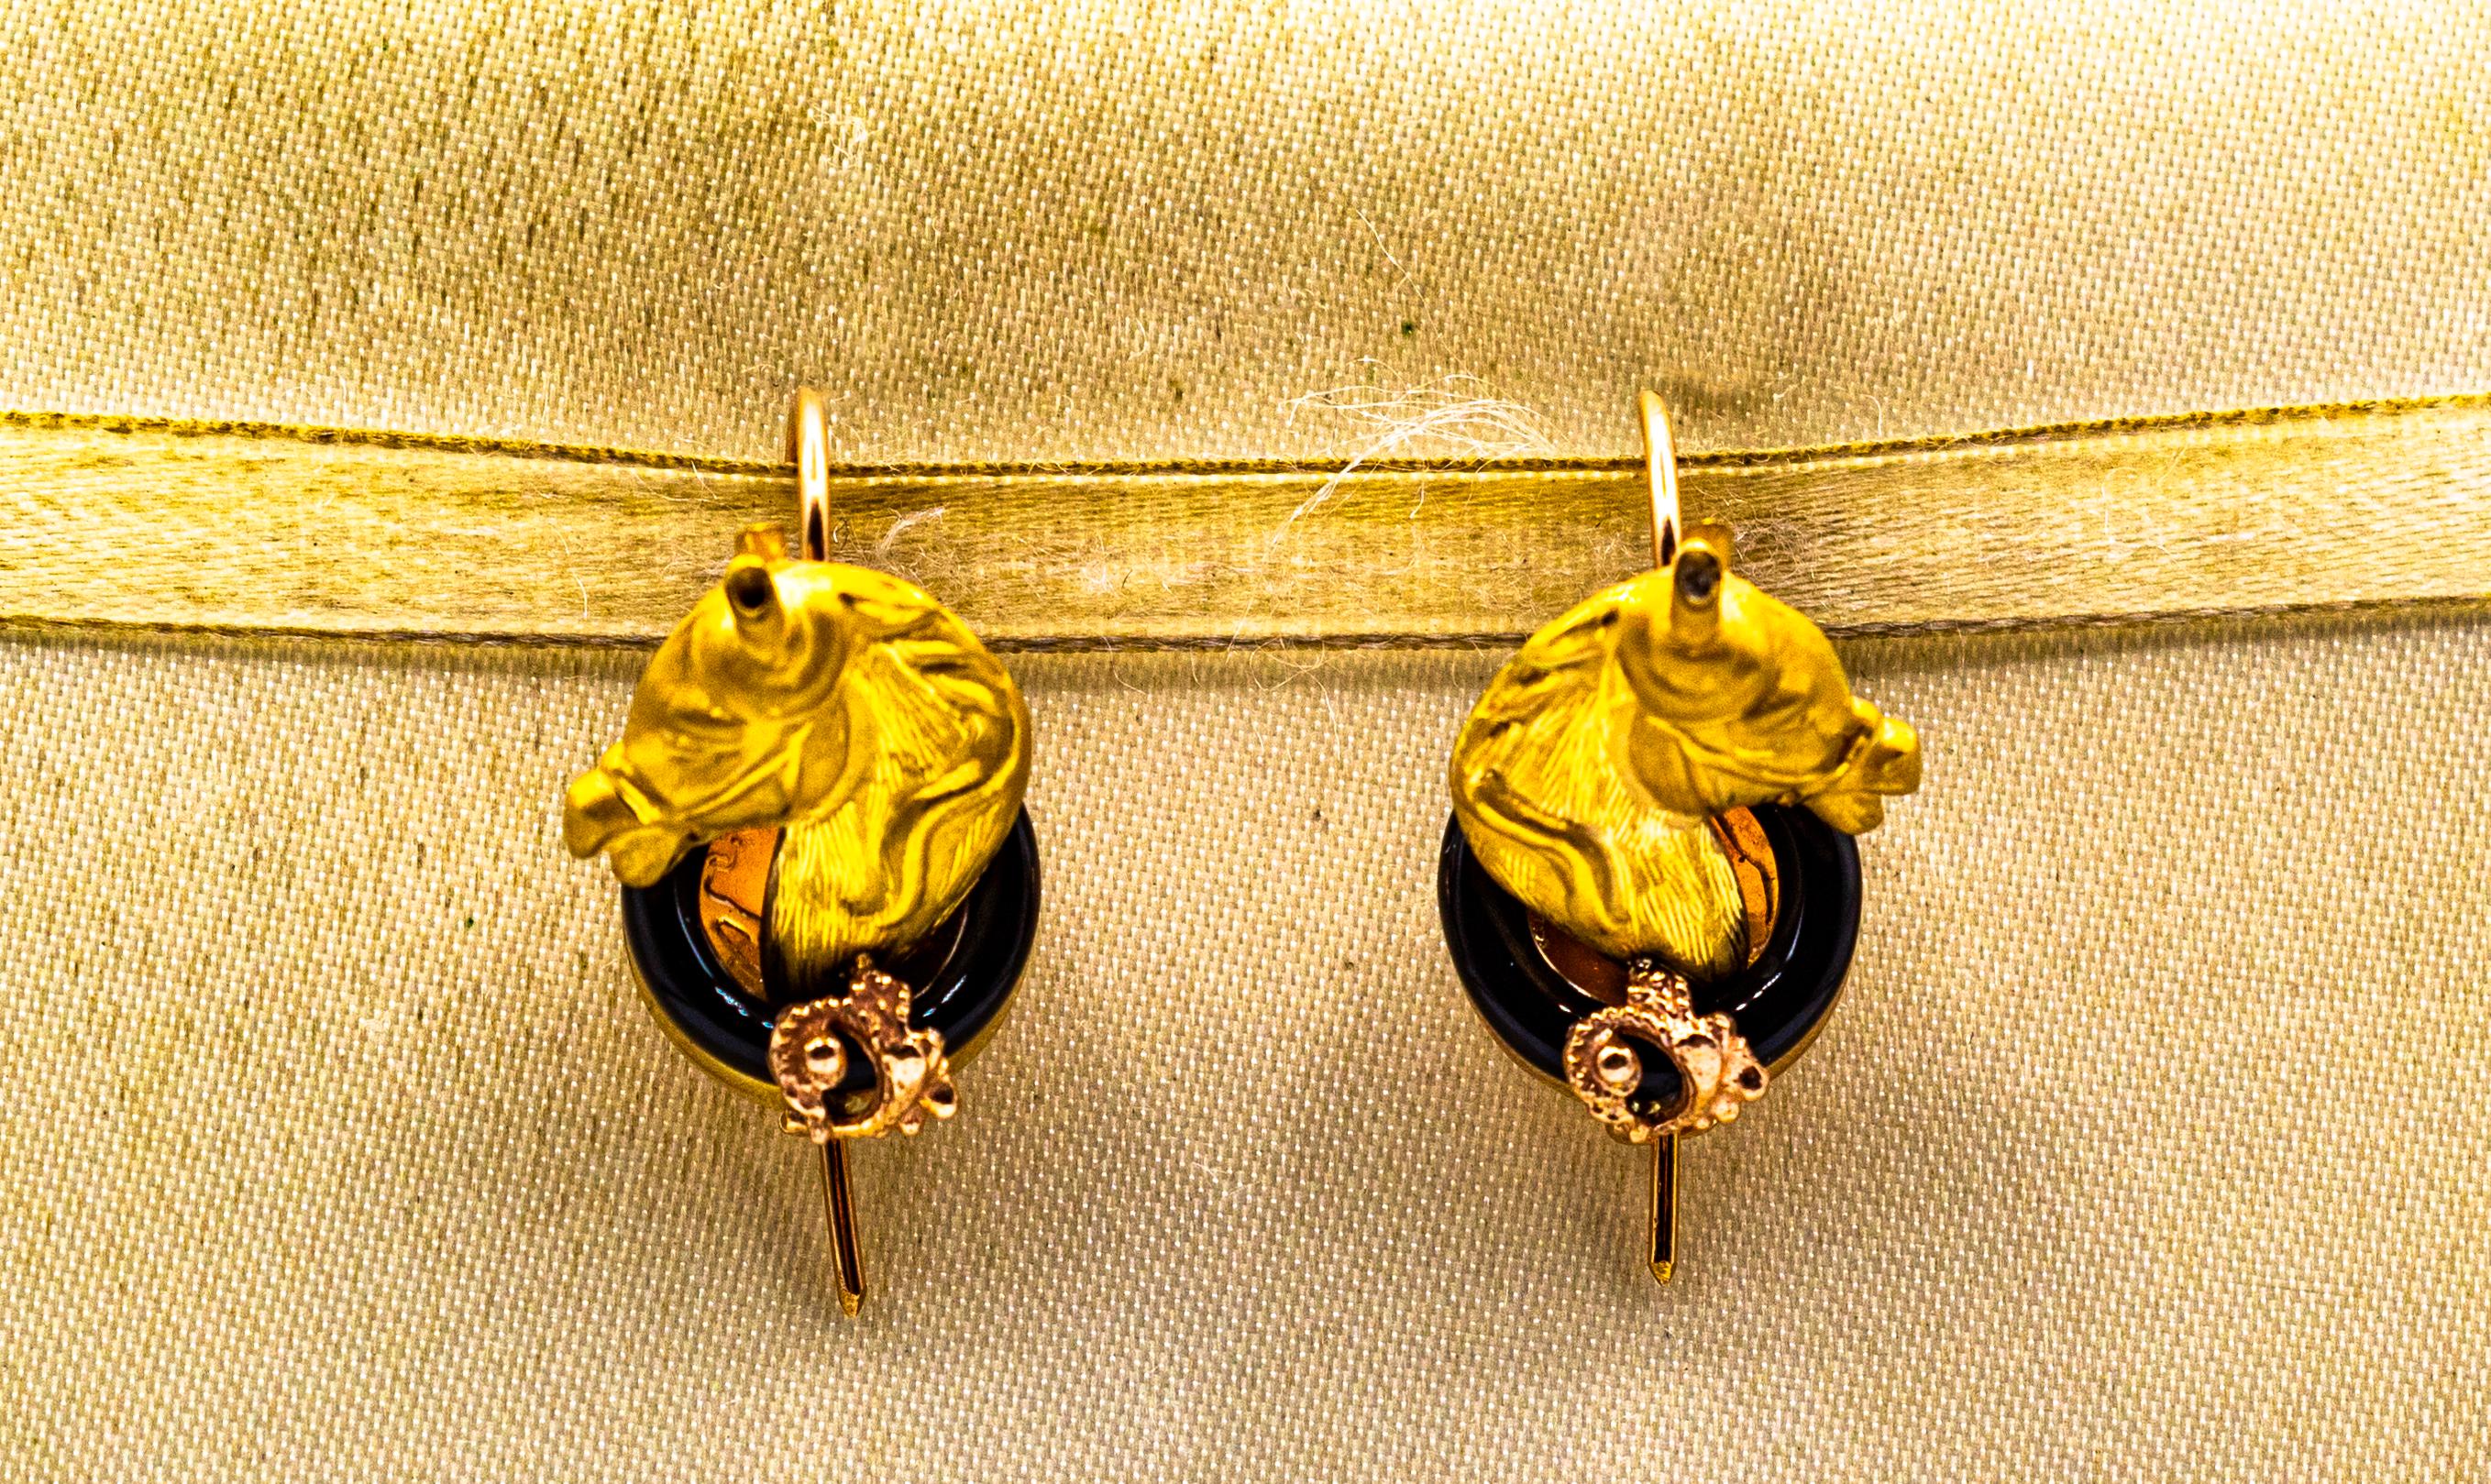 These Earrings are made of 9K Yellow Gold.
These Earrings have two Onyxes.

These Earrings are inspired by Art Nouveau.

All our Earrings have pins for pierced ears but we can change the closure and make any of our Earrings suitable even for